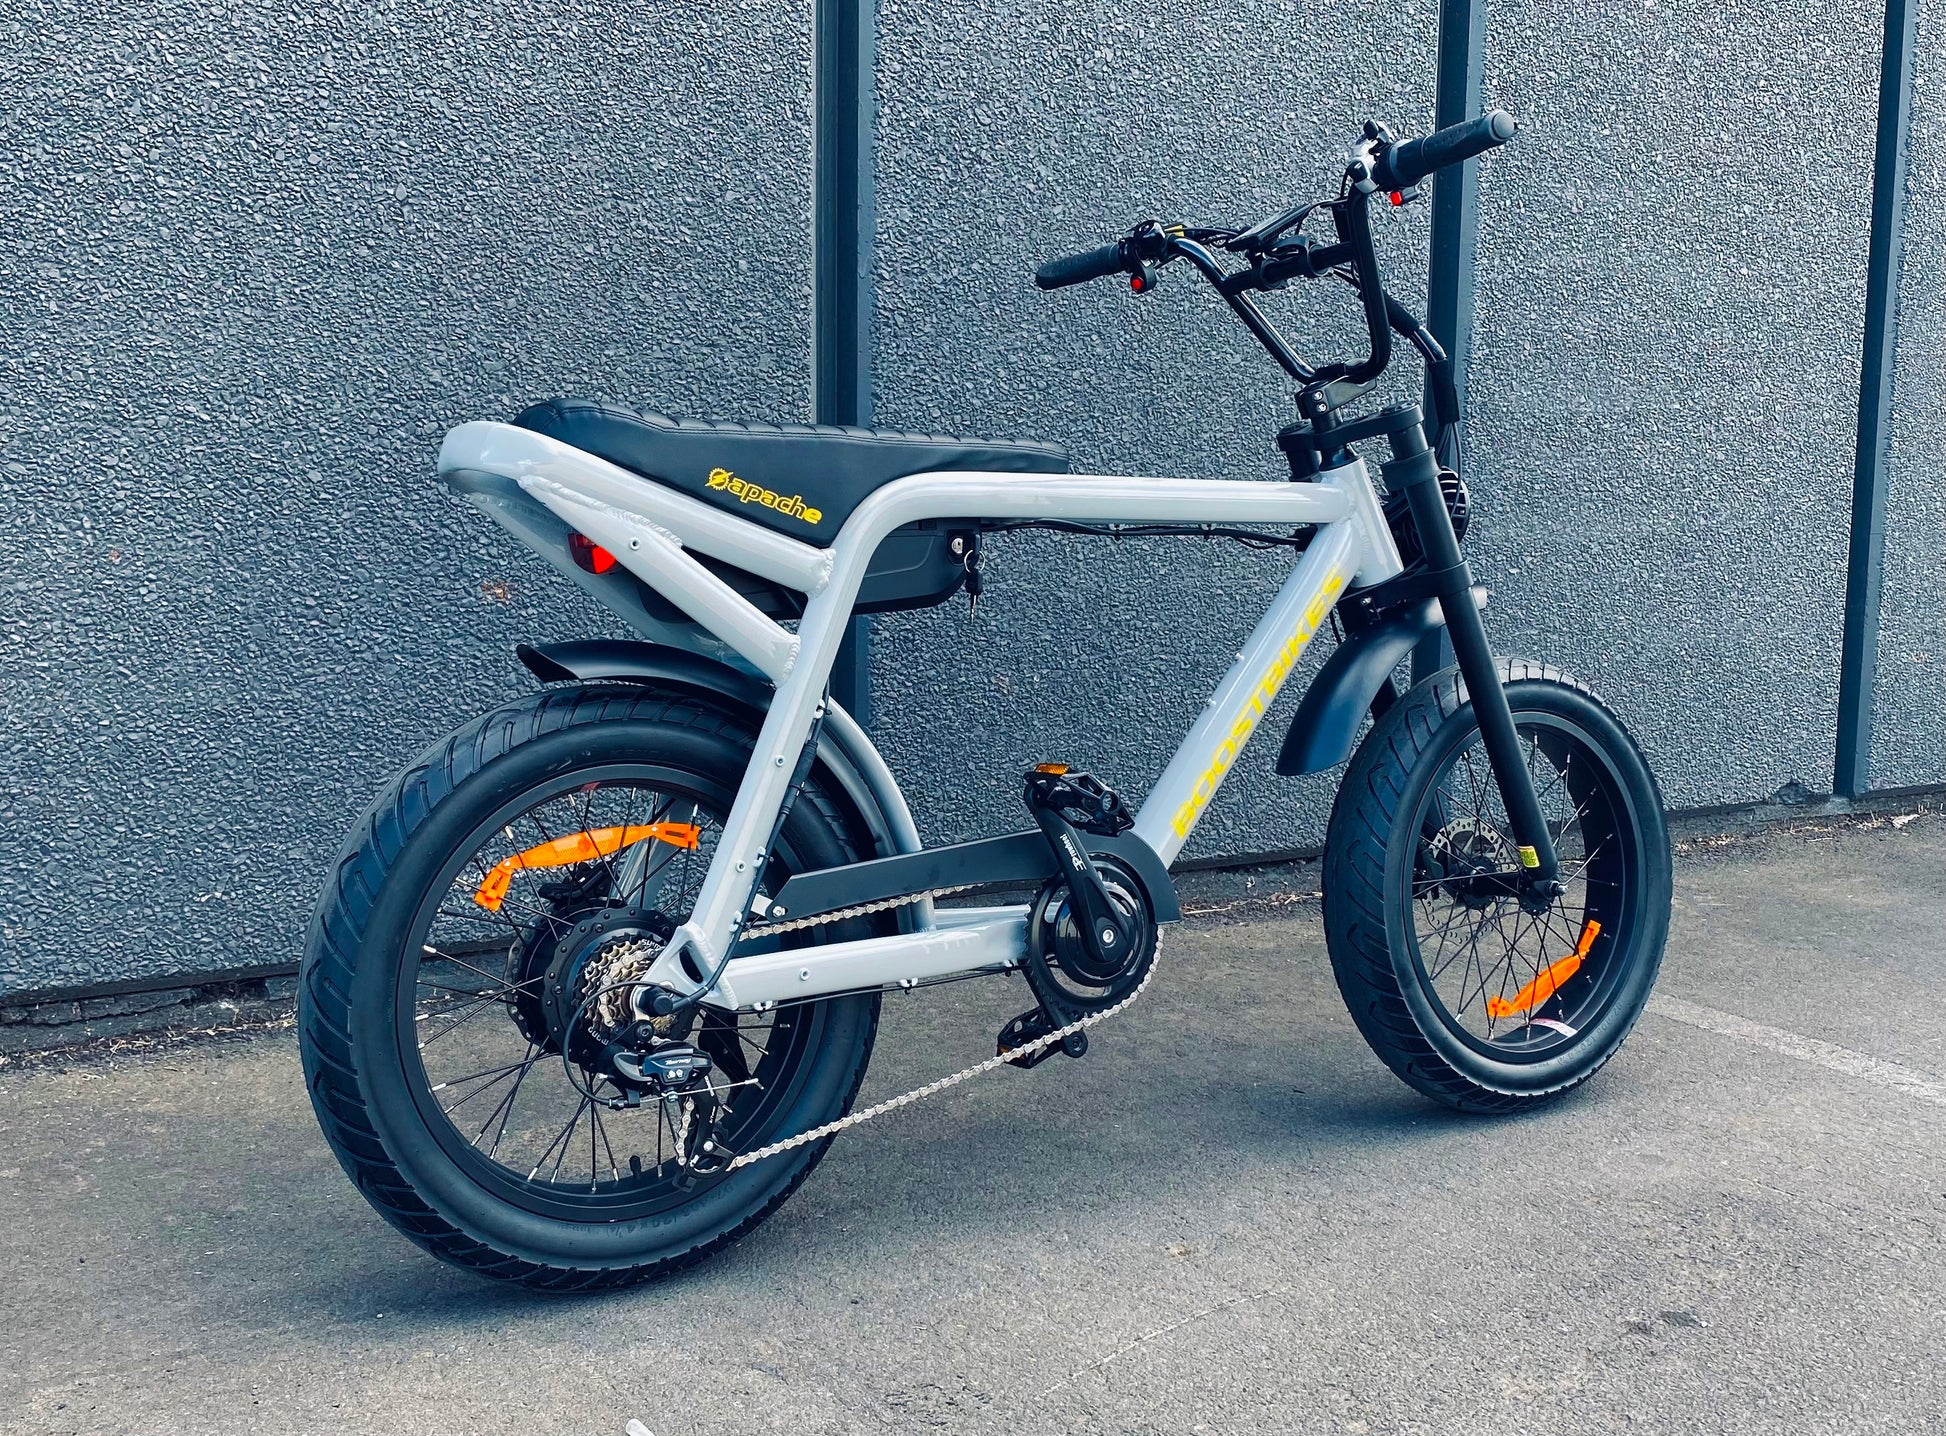 Apache, Modern yet retro 20" fat tyre ebike with performance and packed with features in true SUPER 73 style from Boostbikes.